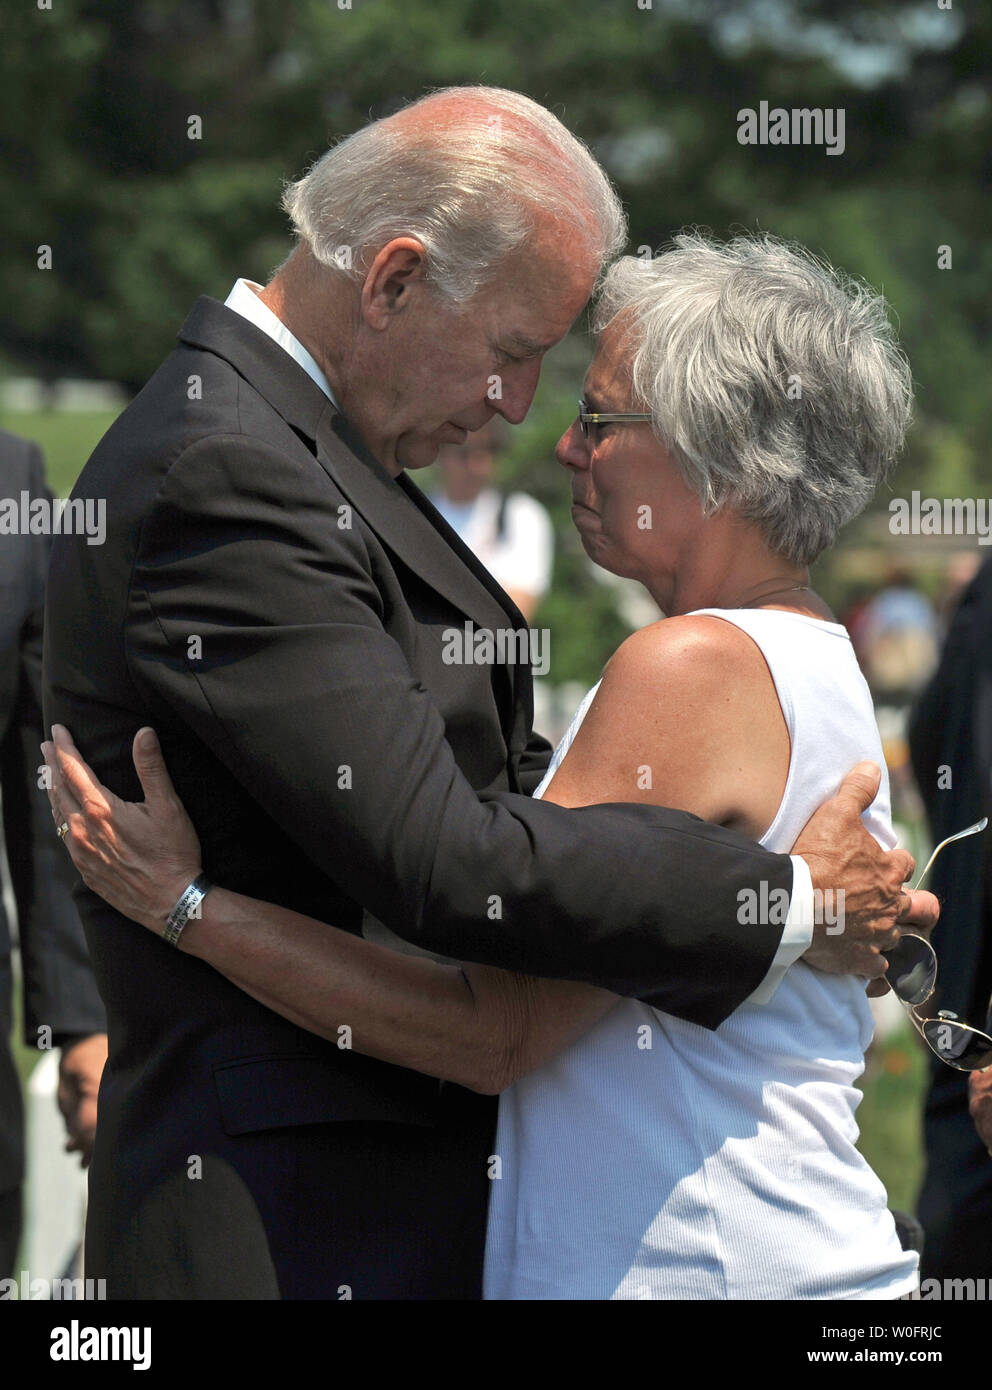 Vice President Joe Biden embraces Susan van Aalten , whose son Army Sgt. Alexander van Aalten was killed while serving in Afghanistan, in section 60 at Arlington National Cemetery in Arlington, Virginia on Memorial Day, May 31, 2010.   UPI/Kevin Dietsch Stock Photo